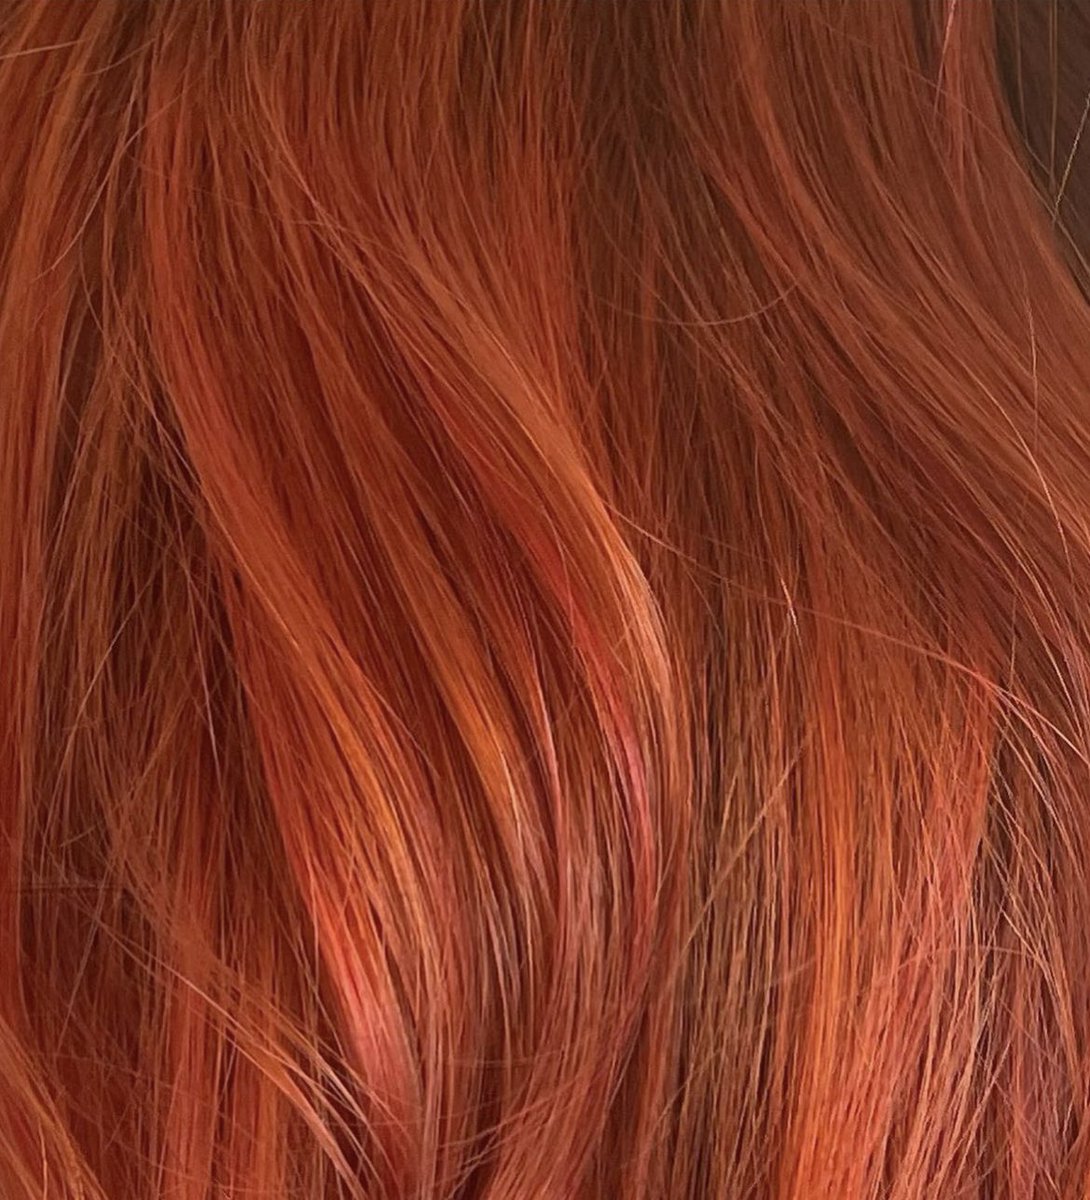 All about that copper!!! #beauty #copperhair #fashioncolor #hair #hairstyle #haircolor #stylist #surpriseaz #peoriaaz #paulmitchellcolor #Trending #fall